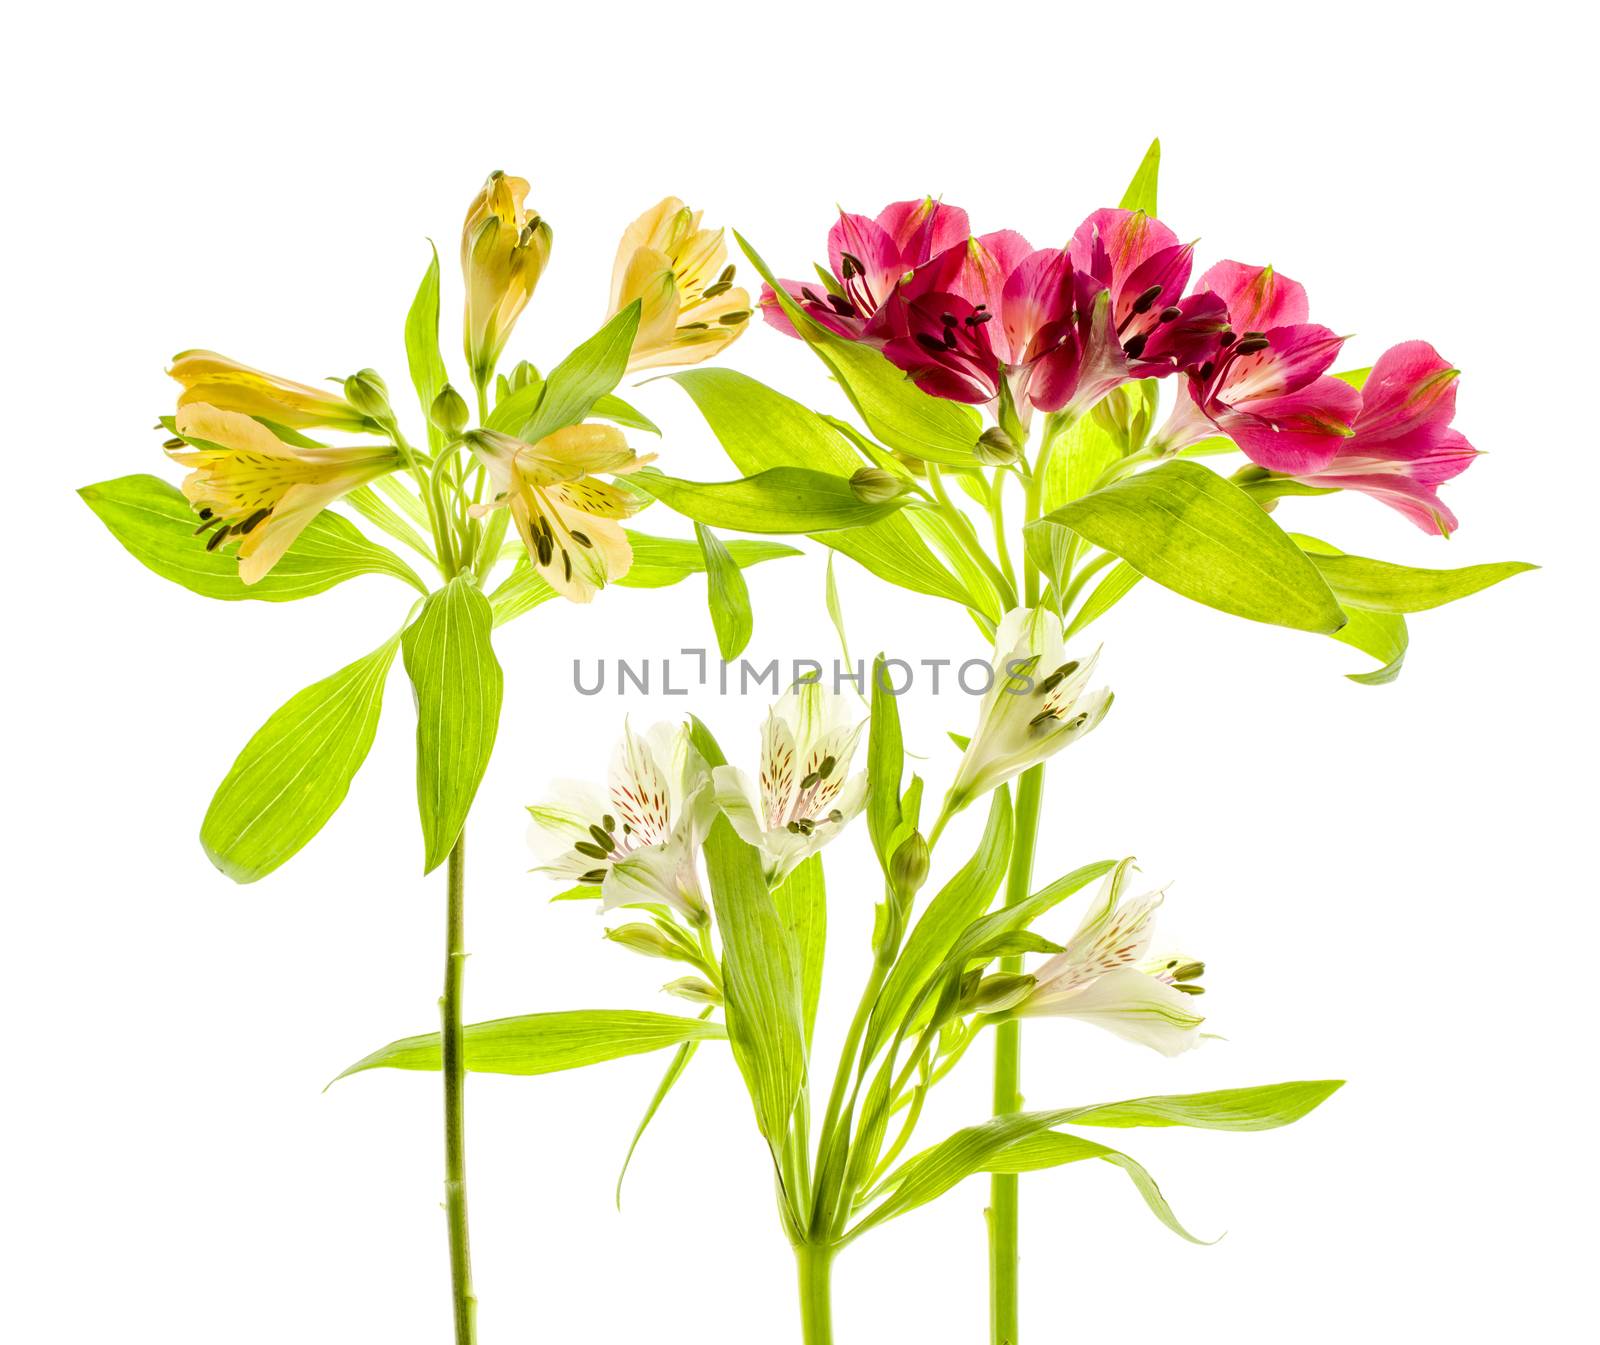 Alstroemeria flower with stamens, close-up on a white background. by sashokddt